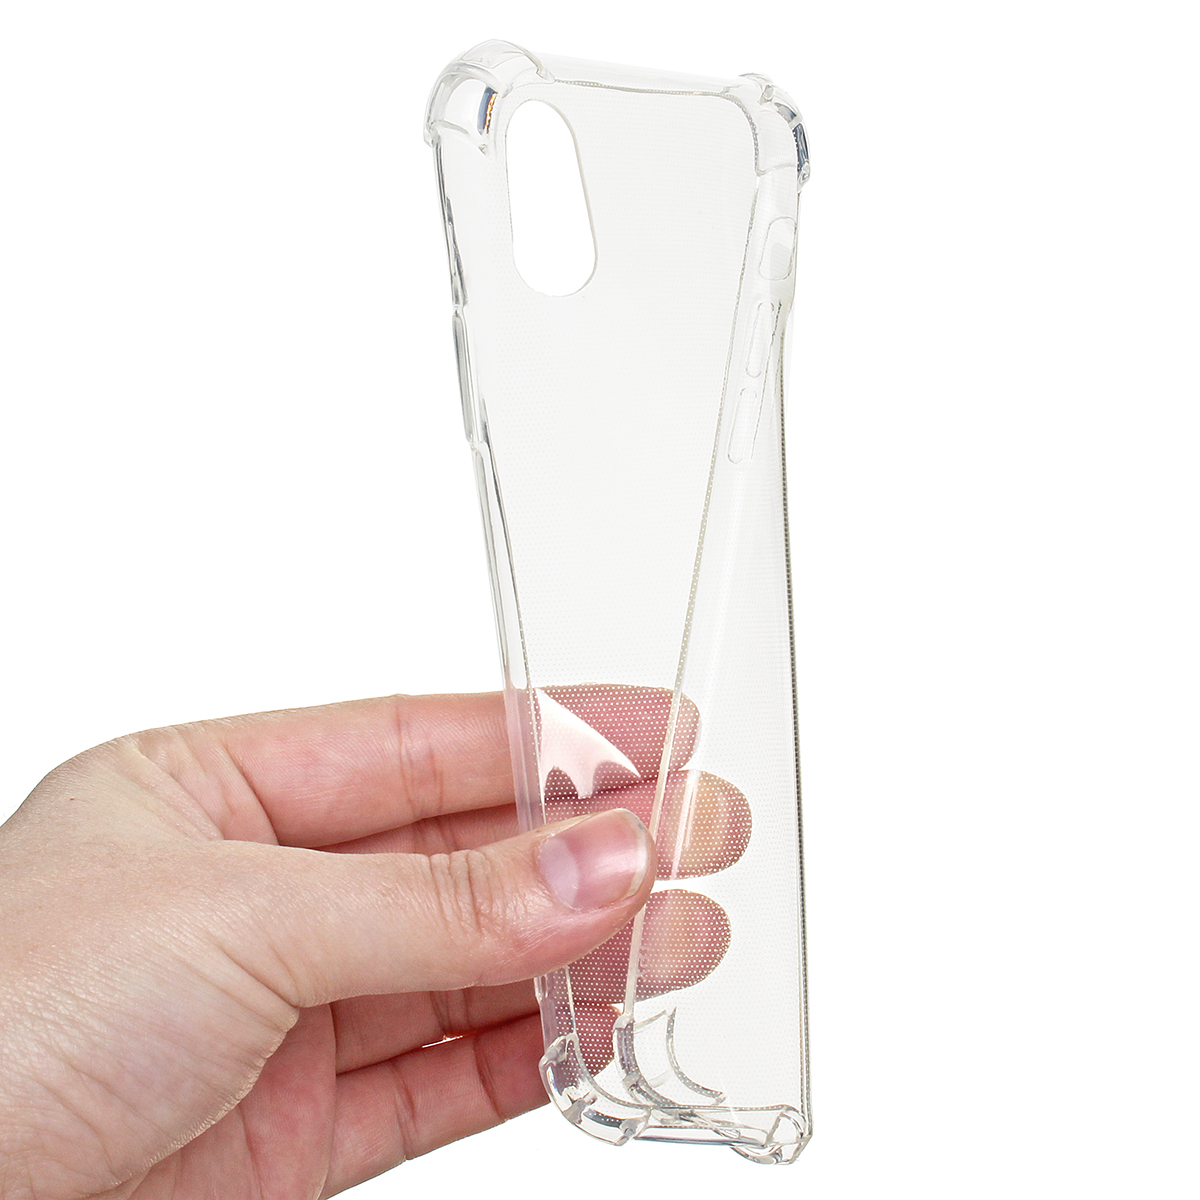 Bakeey-Airbag-Transparent-Clear-Shockproof-Protective-Cover-Case-for-iPhone-X--XS--XR--iP-XS-Max-1633378-3